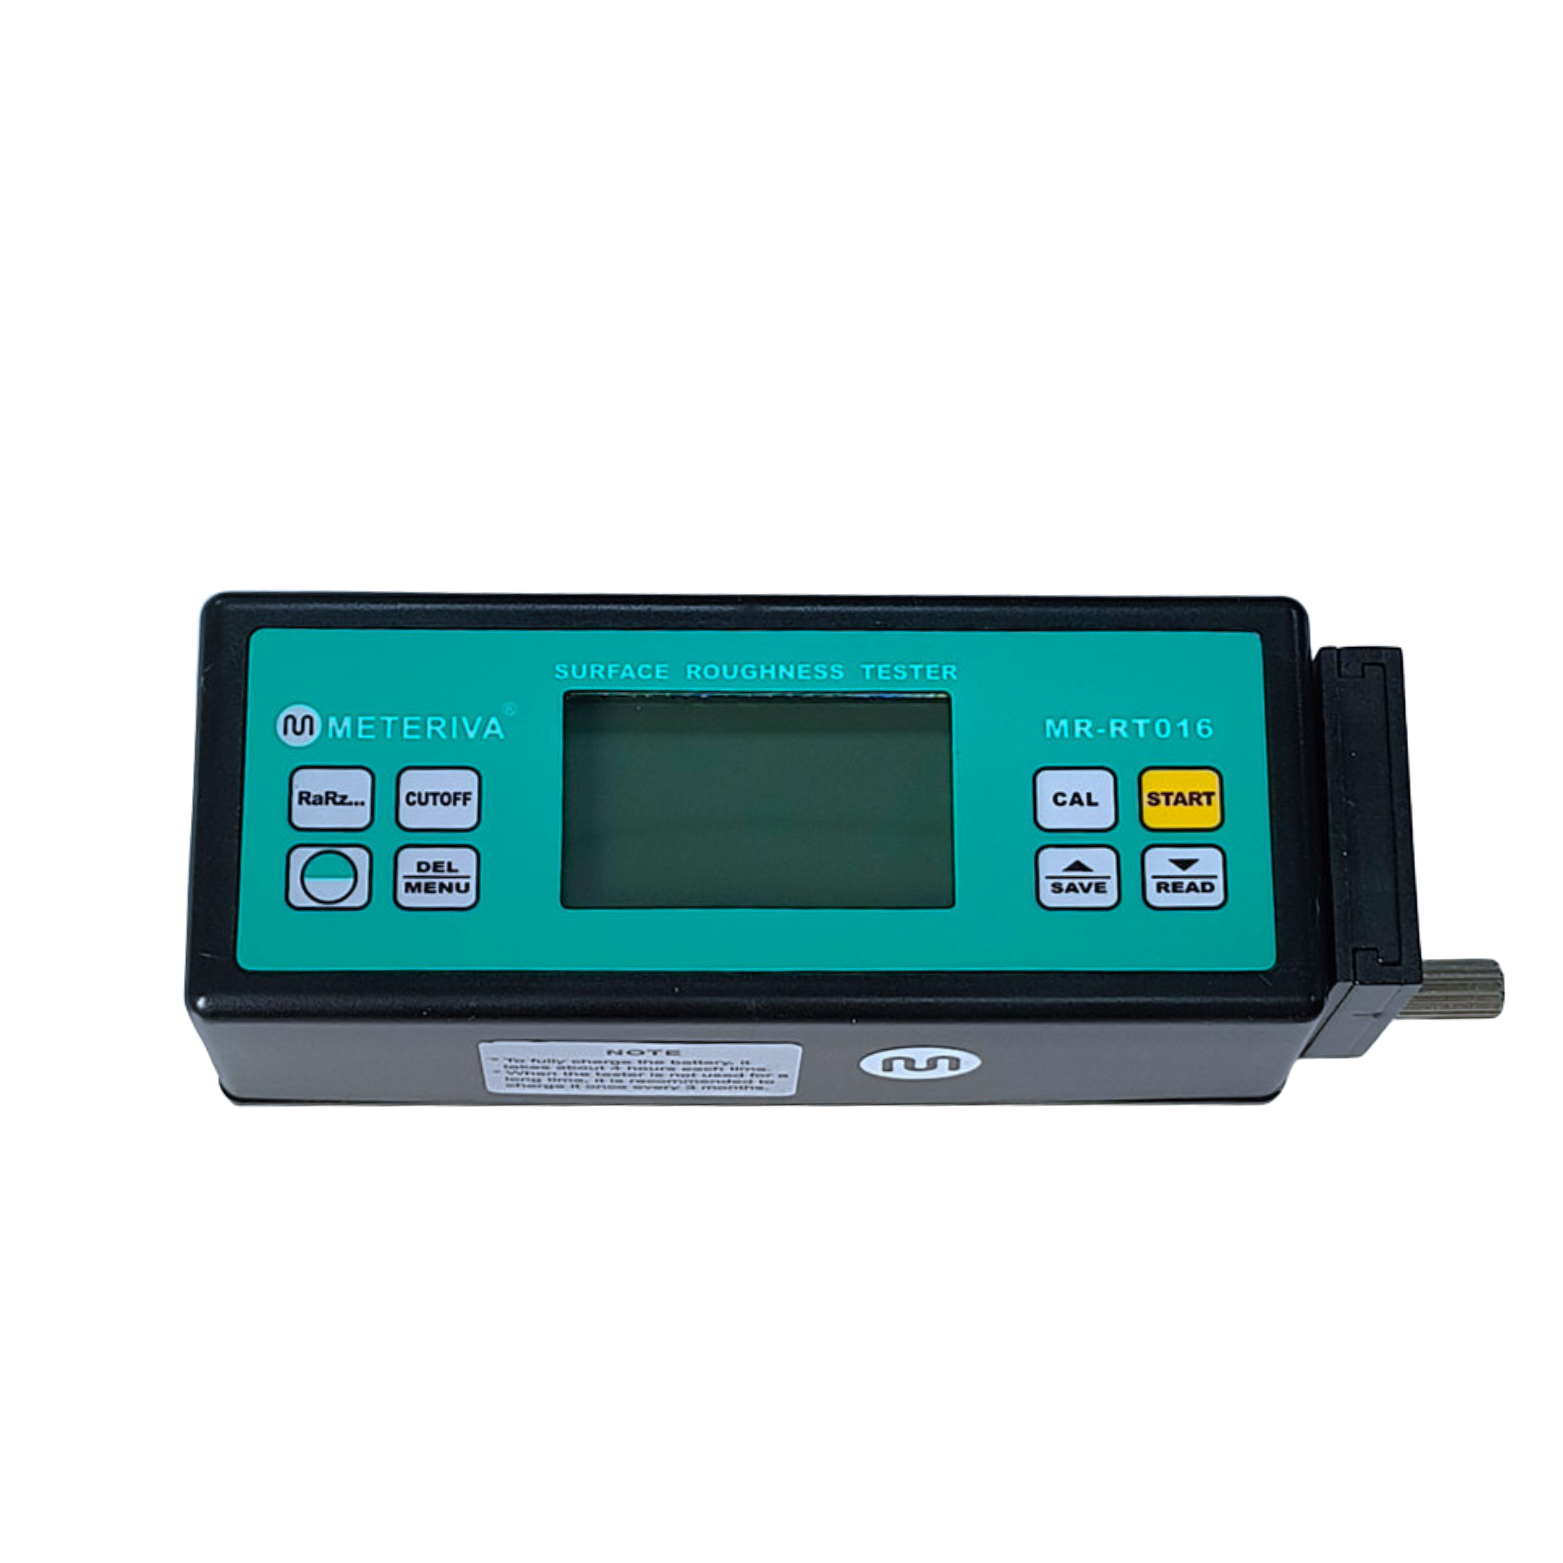 Portable Roughness Tester MR-RT007